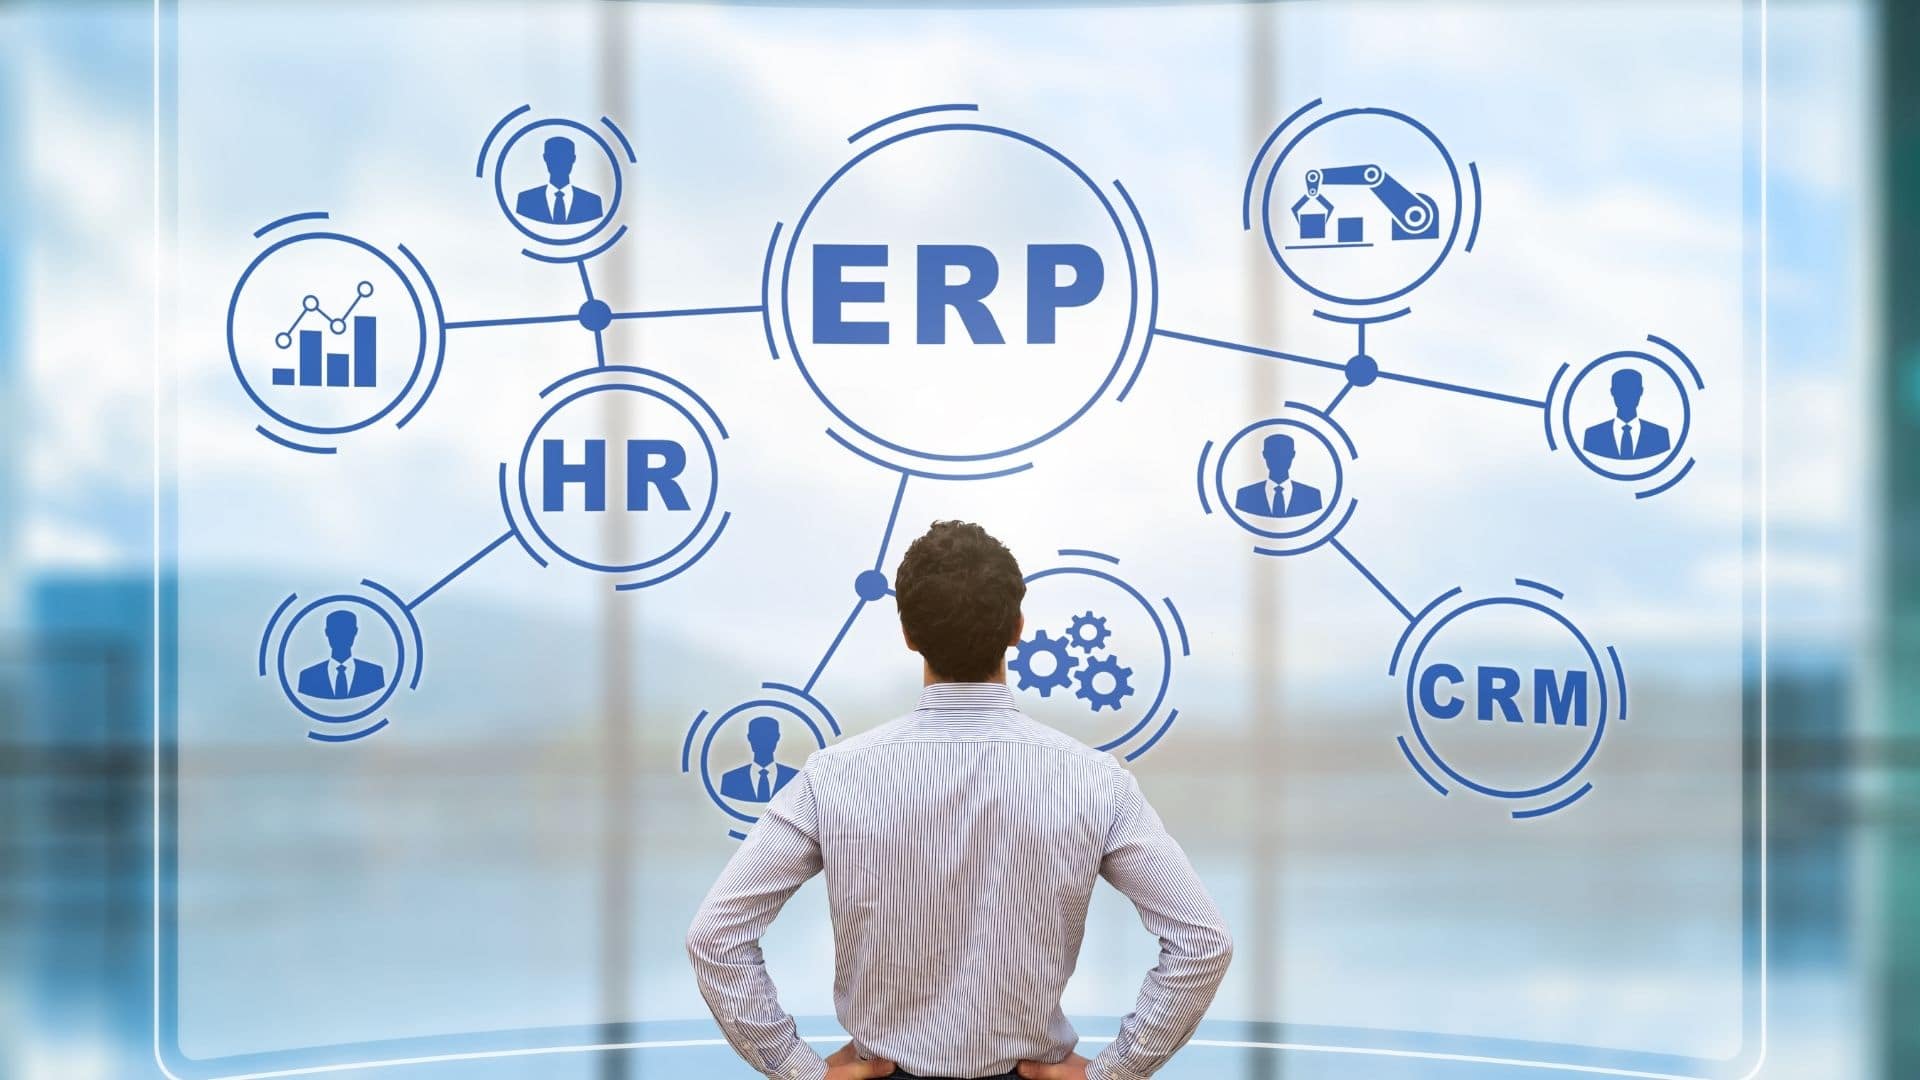 why erp system implementation (https://www.acumatica.com/blog/what-is-the-erp-implementation-process/)